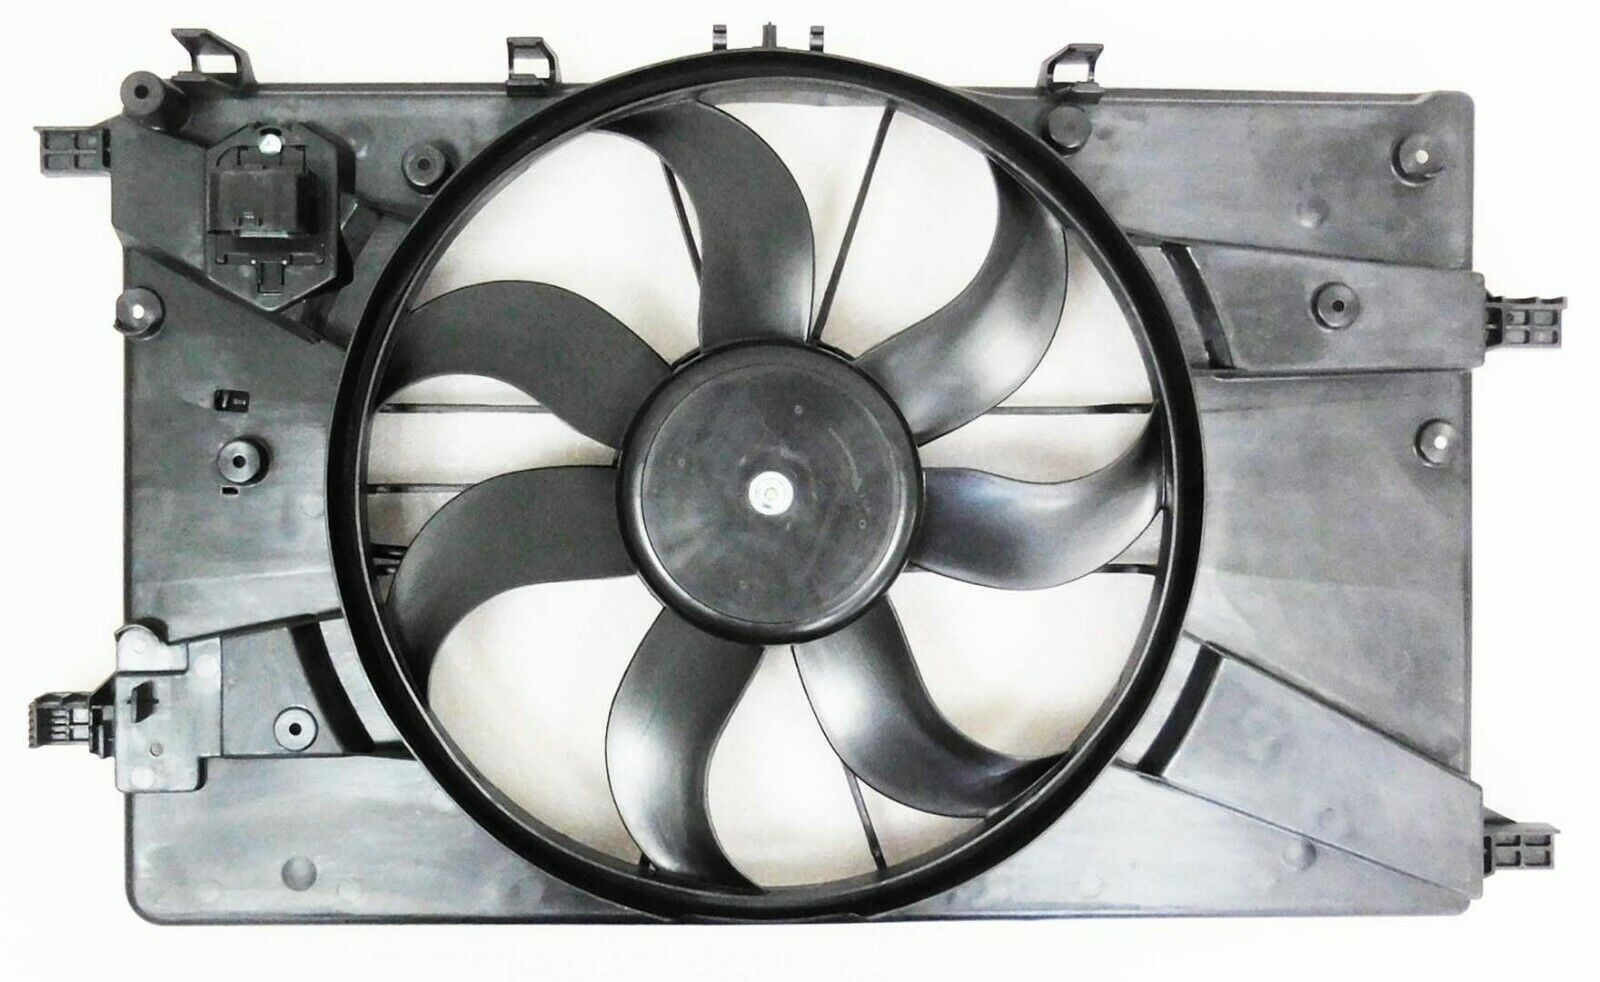 FITS CHEVY CRUZE 2014-2016 1.4L AT LIMITED RADIATOR COOLING FAN ASSEMBLY SHROUD - $326.70